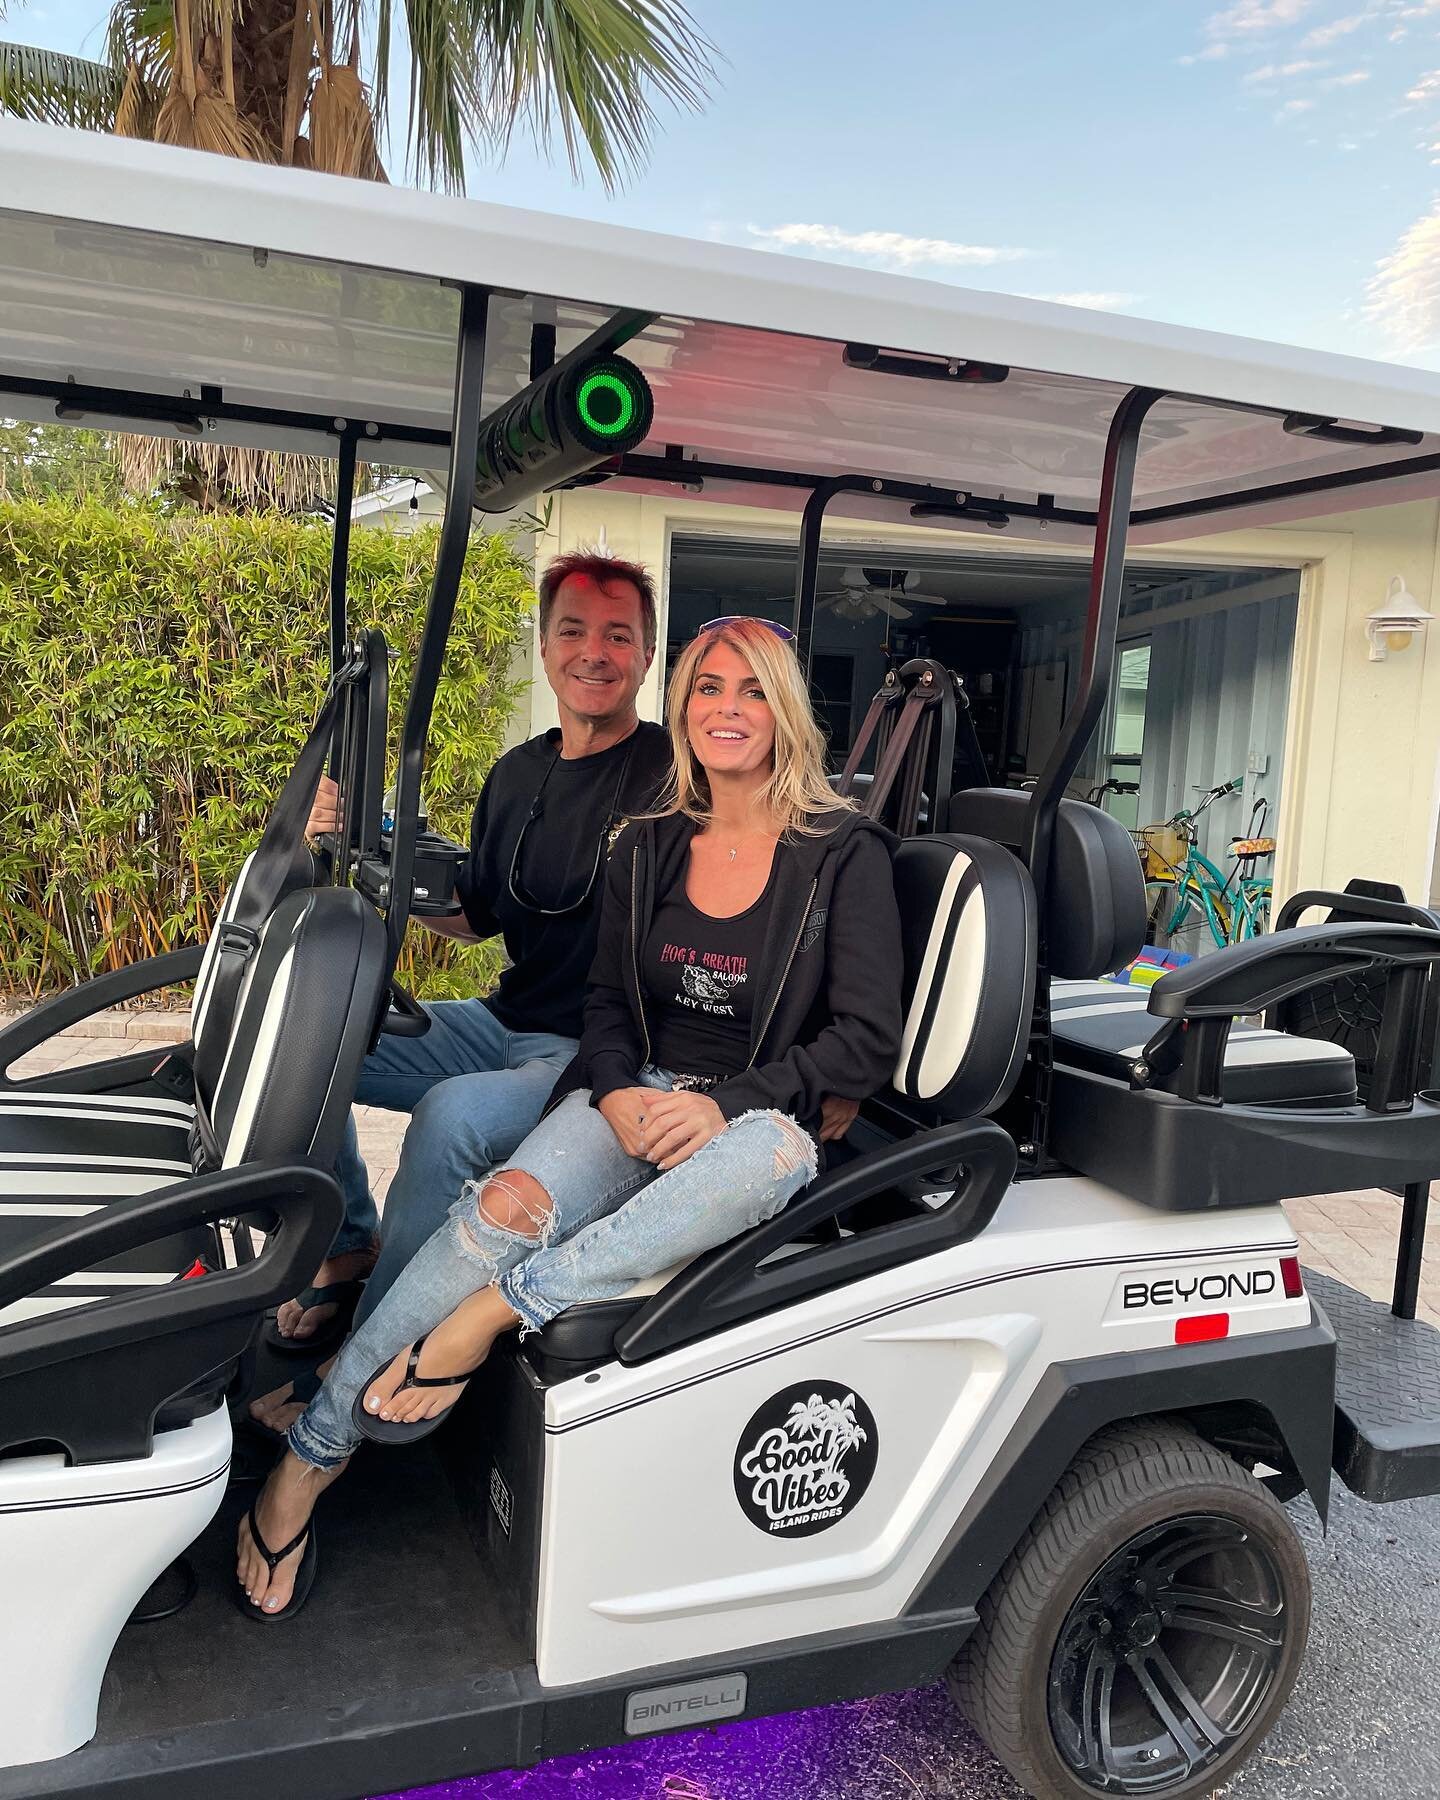 🦃 Thanksgiving Week is in Full Swing 🦃 Elevate your #siestakey experience by renting one of our all electric, fully loaded luxury golf carts 😎🛺🌴 DM us for our holiday weekly special ☀️ @goodvibesislandrides